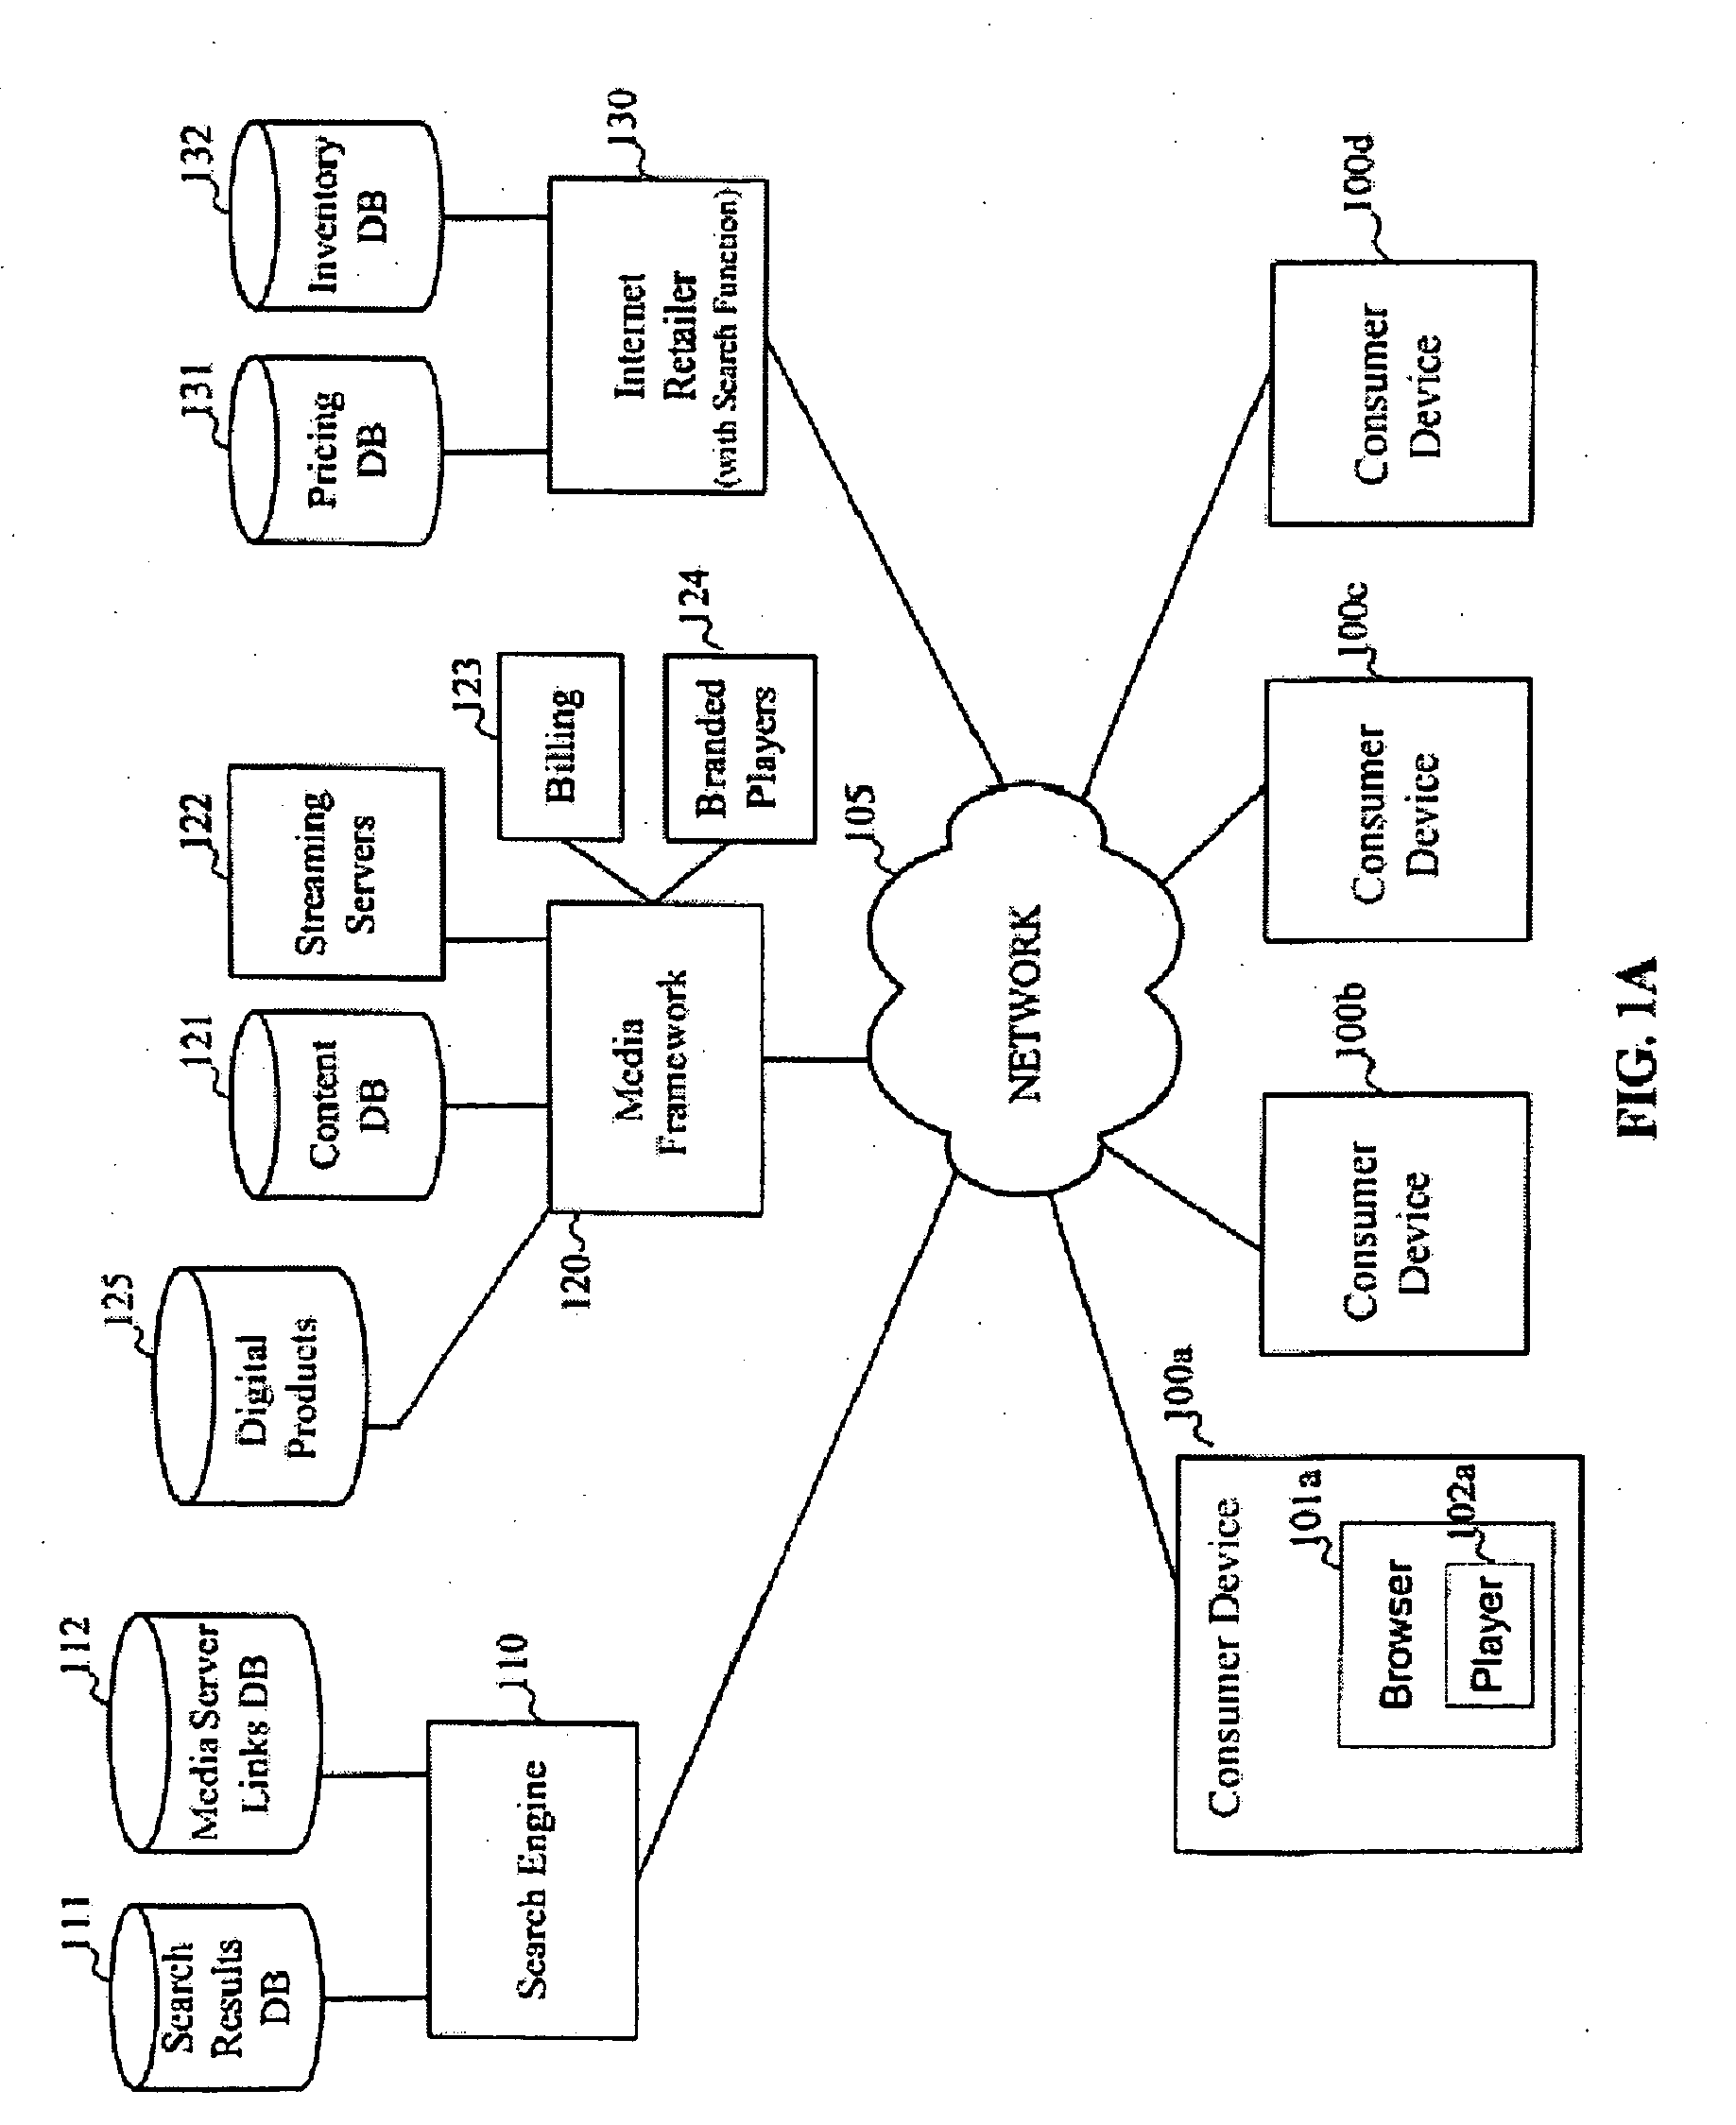 System and method for providing media samples on-line in response to media related searches on the Internet